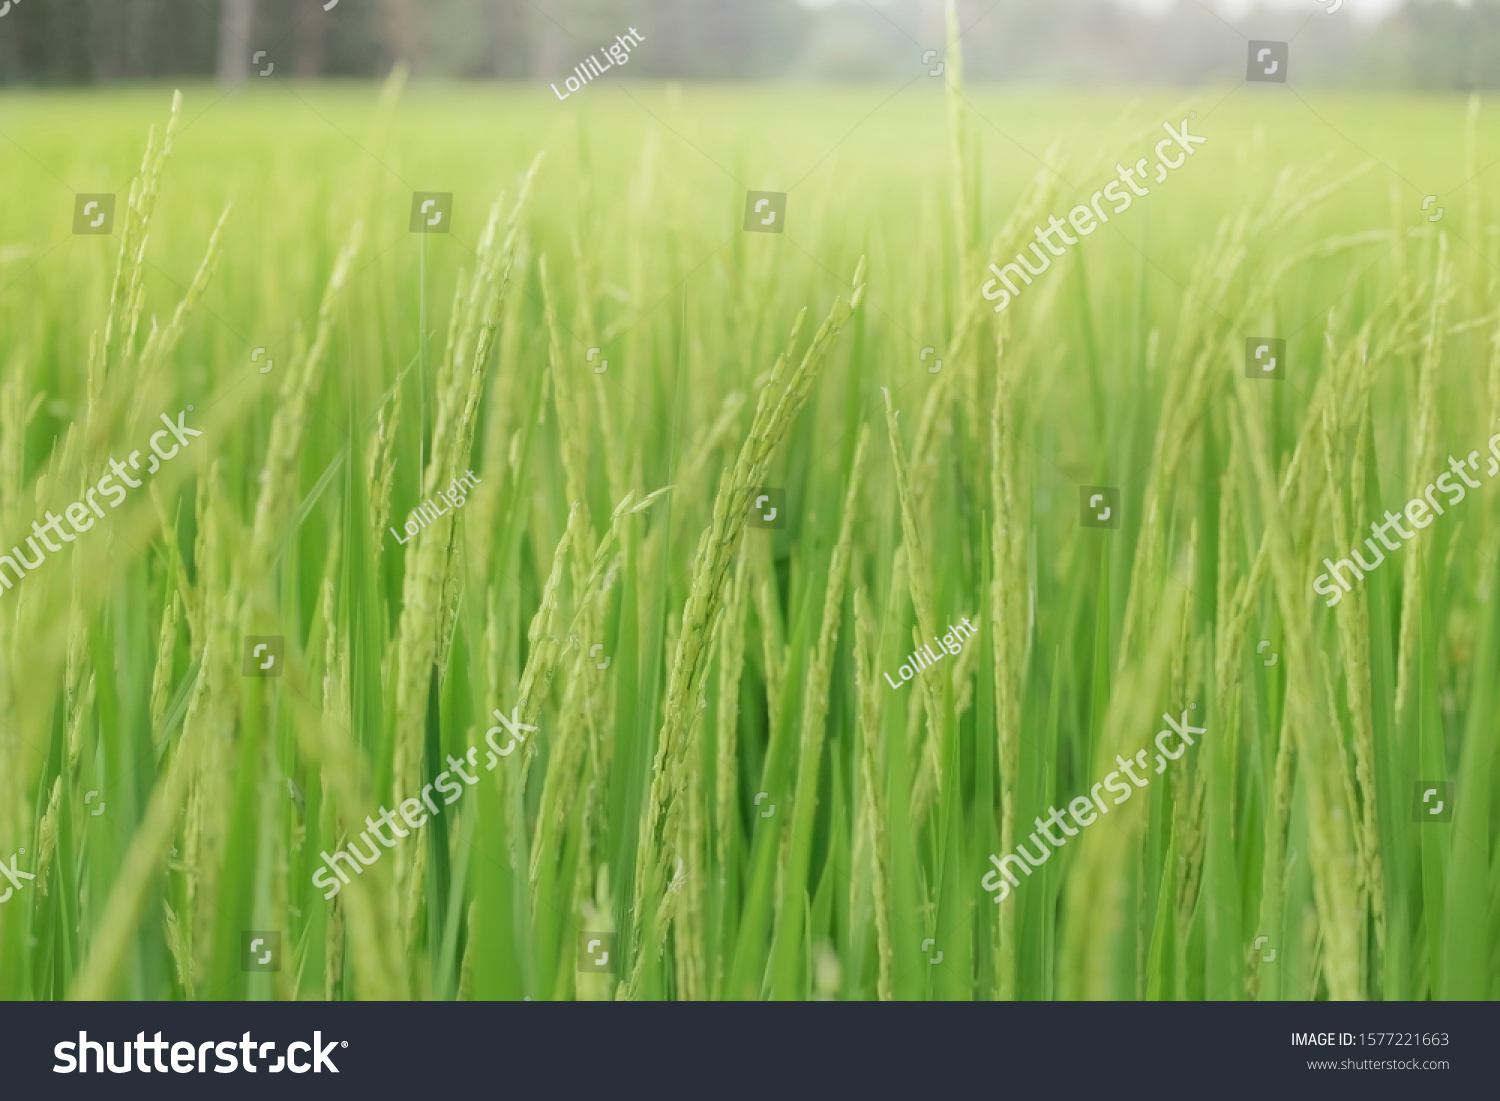 Closeup Shot of A Rice Field or Paddy Field, Rice field in farming countryside. #1577221663